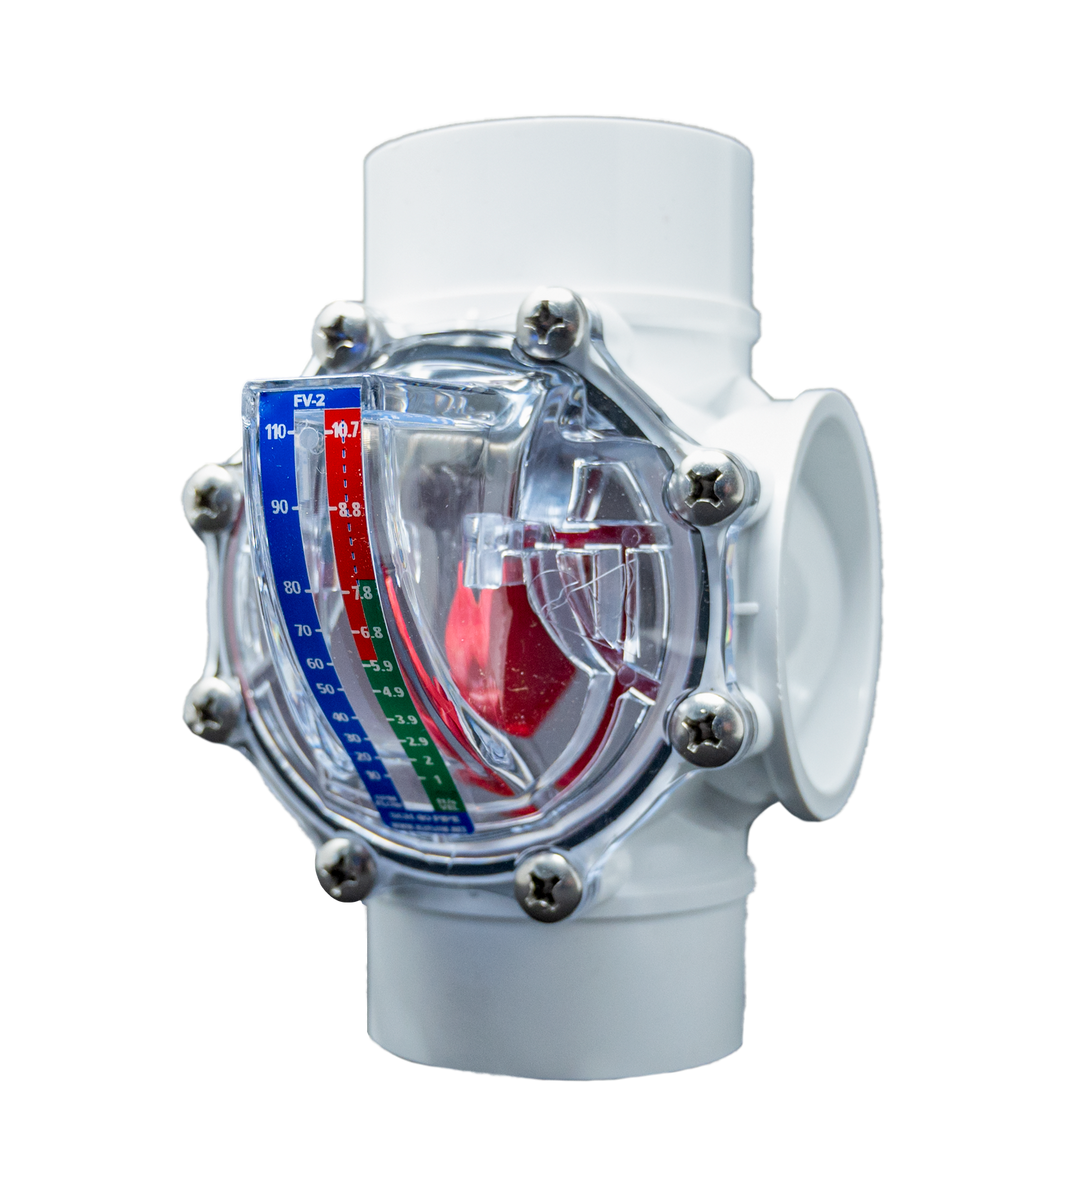 Angled Side View - White FlowVis GPM Flow Meter Valve for 2" & 2.5" Pipes (FV-2)